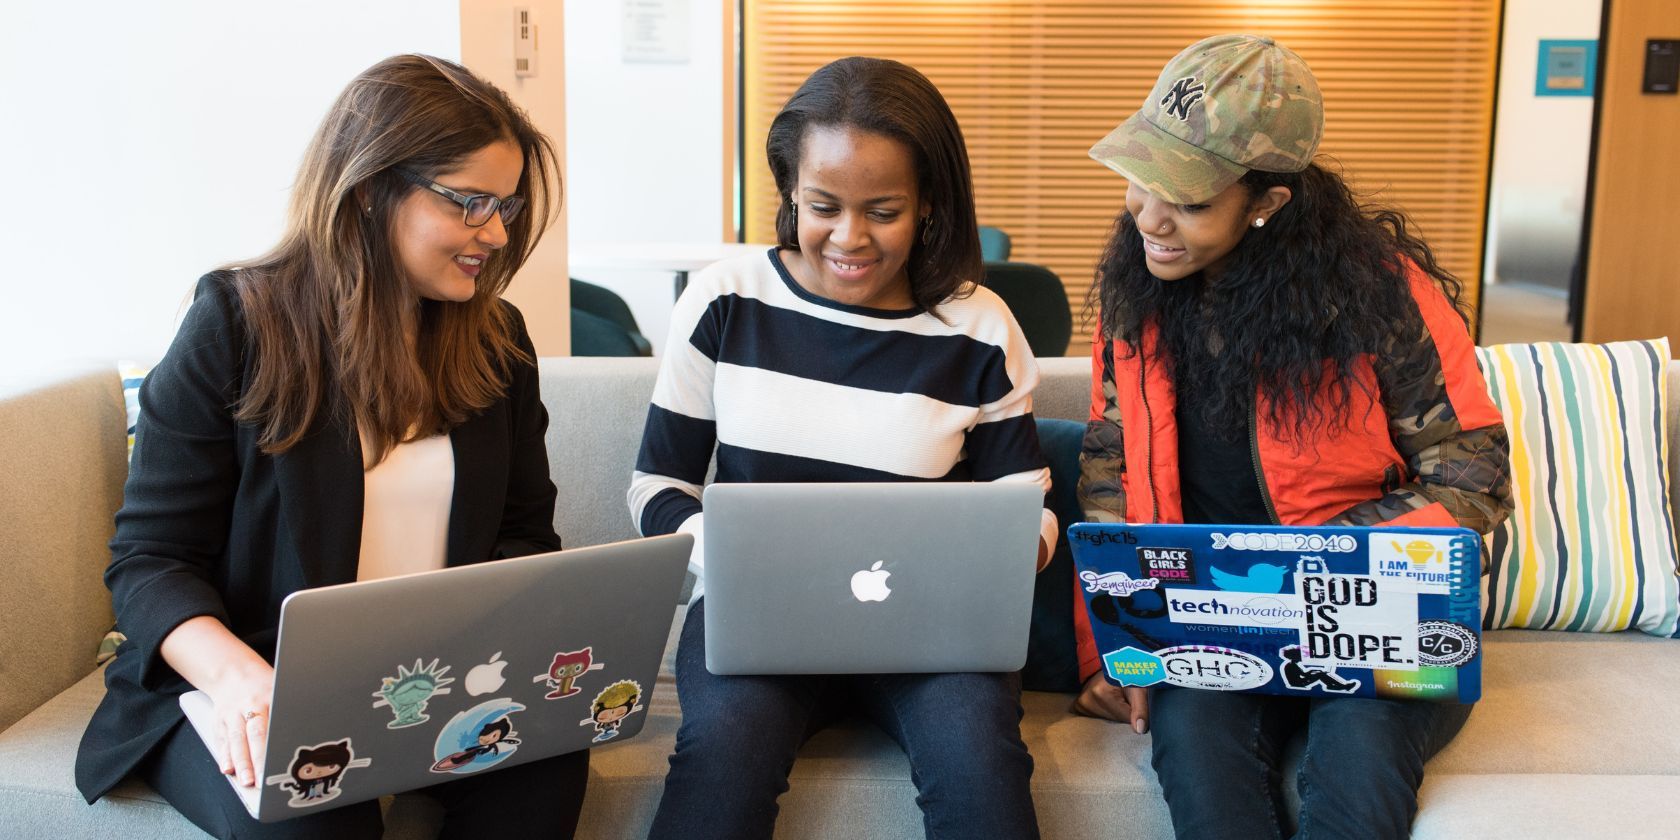 three women smiling with open laptops on their laps